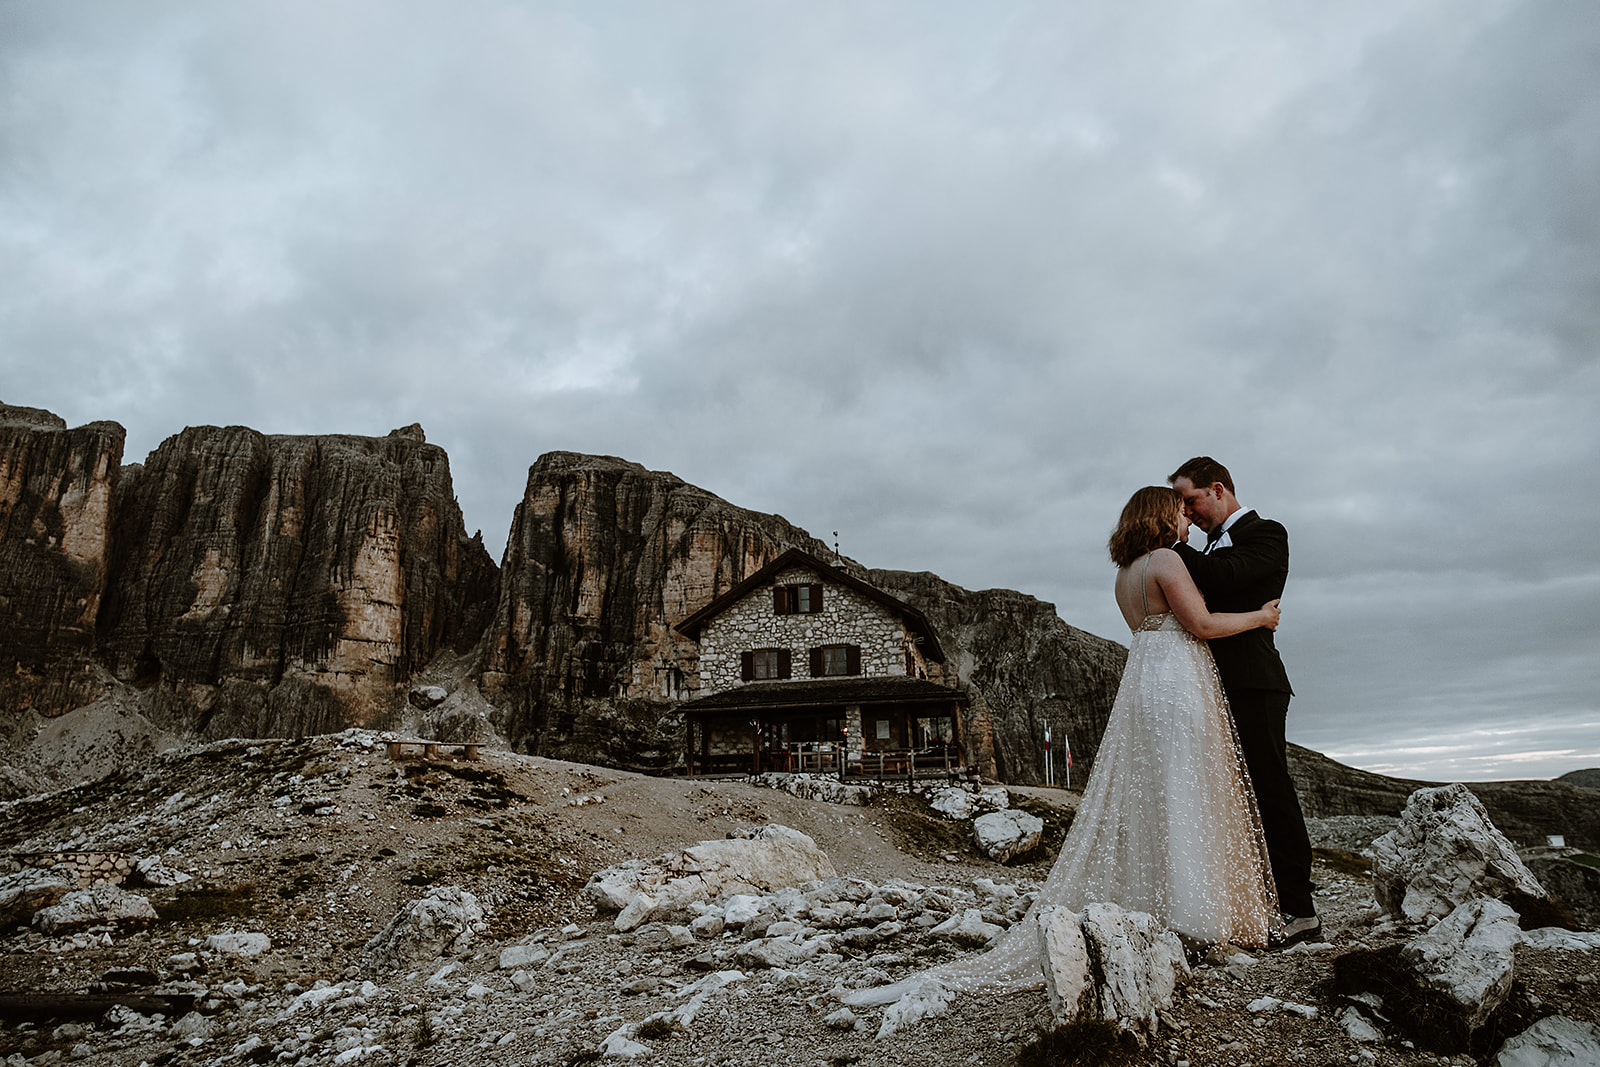 A mountain hut elopement location in the Dolomites. A bride and groom in a tight embrace with a stone mountain hut and tall mountains in the distance.